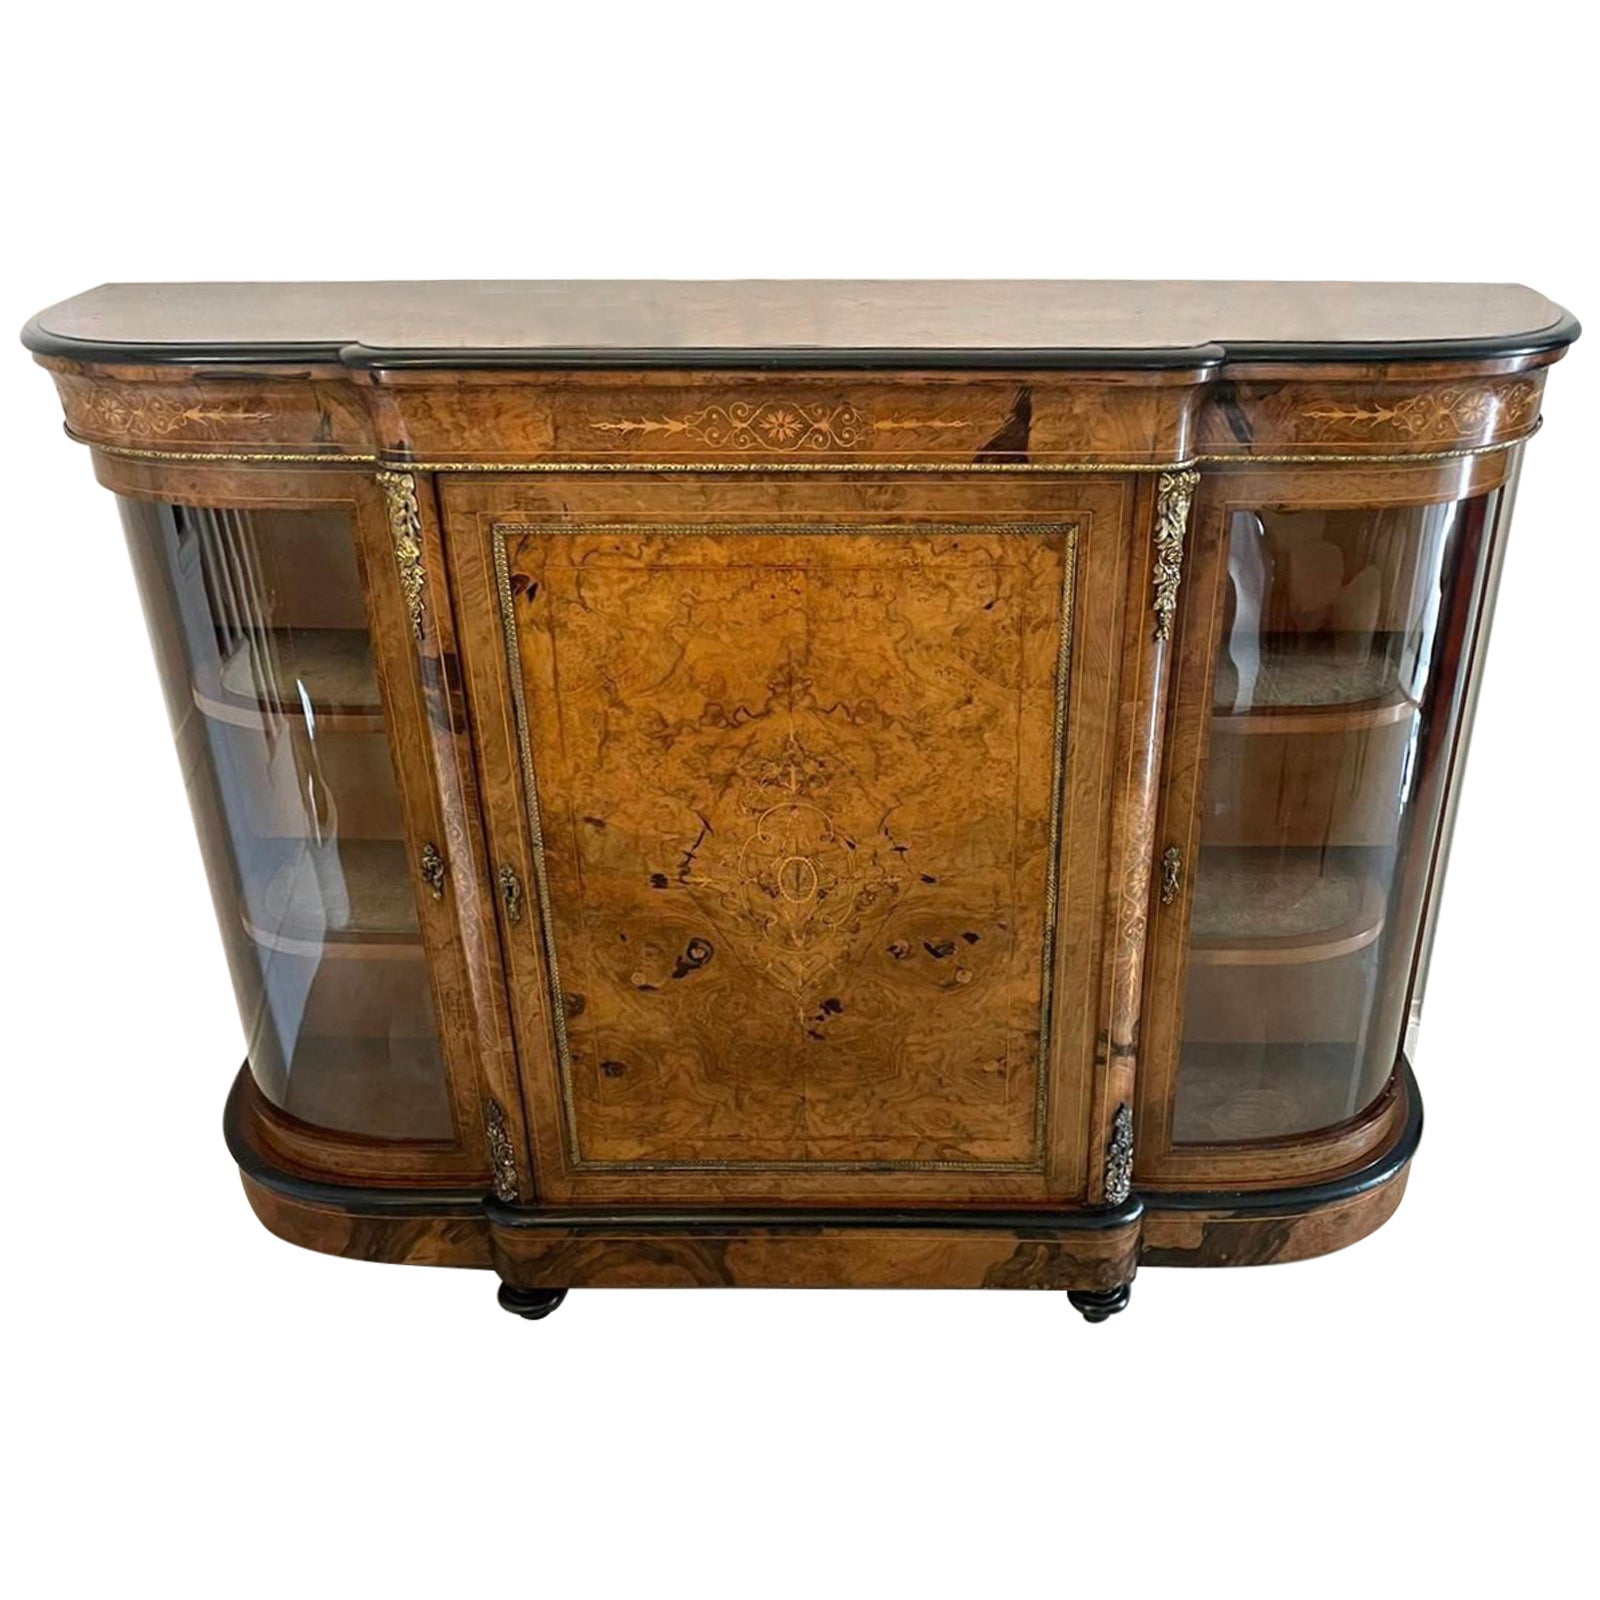 Superb Quality Antique Victorian Burr Walnut Inlaid Credenza/Sideboard  For Sale